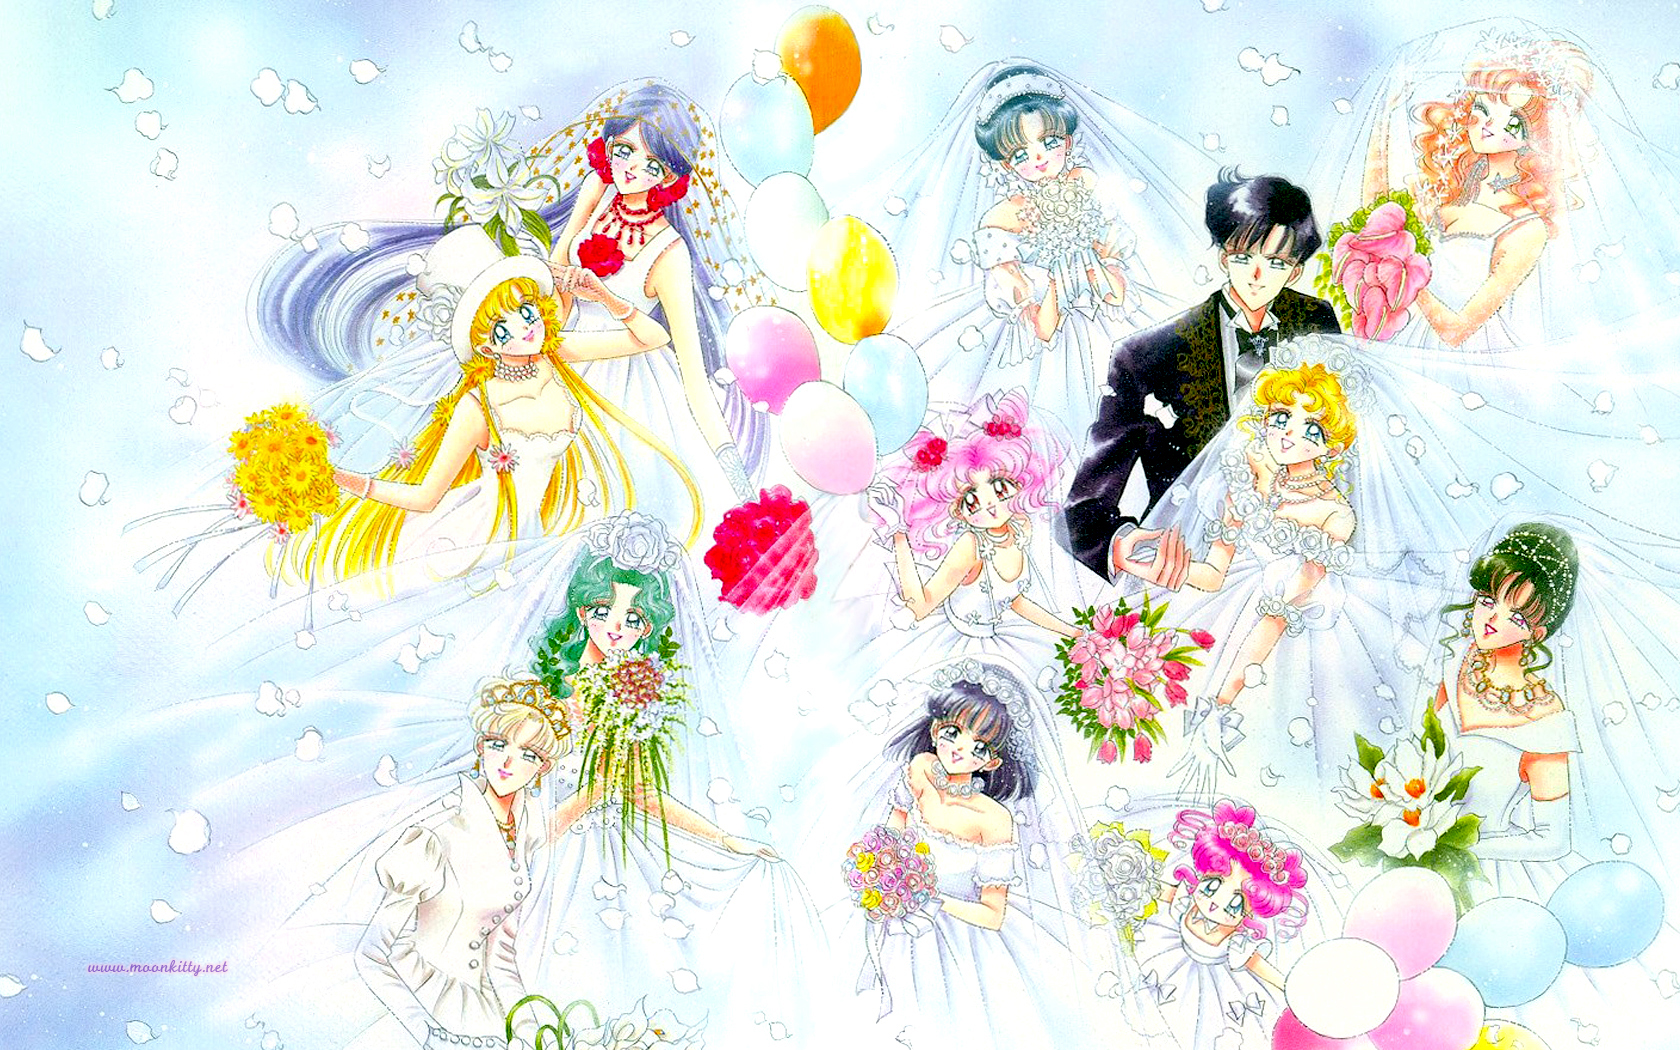 moonkitty.net: Sailor Moon Wallpapers Widescreen Page 2